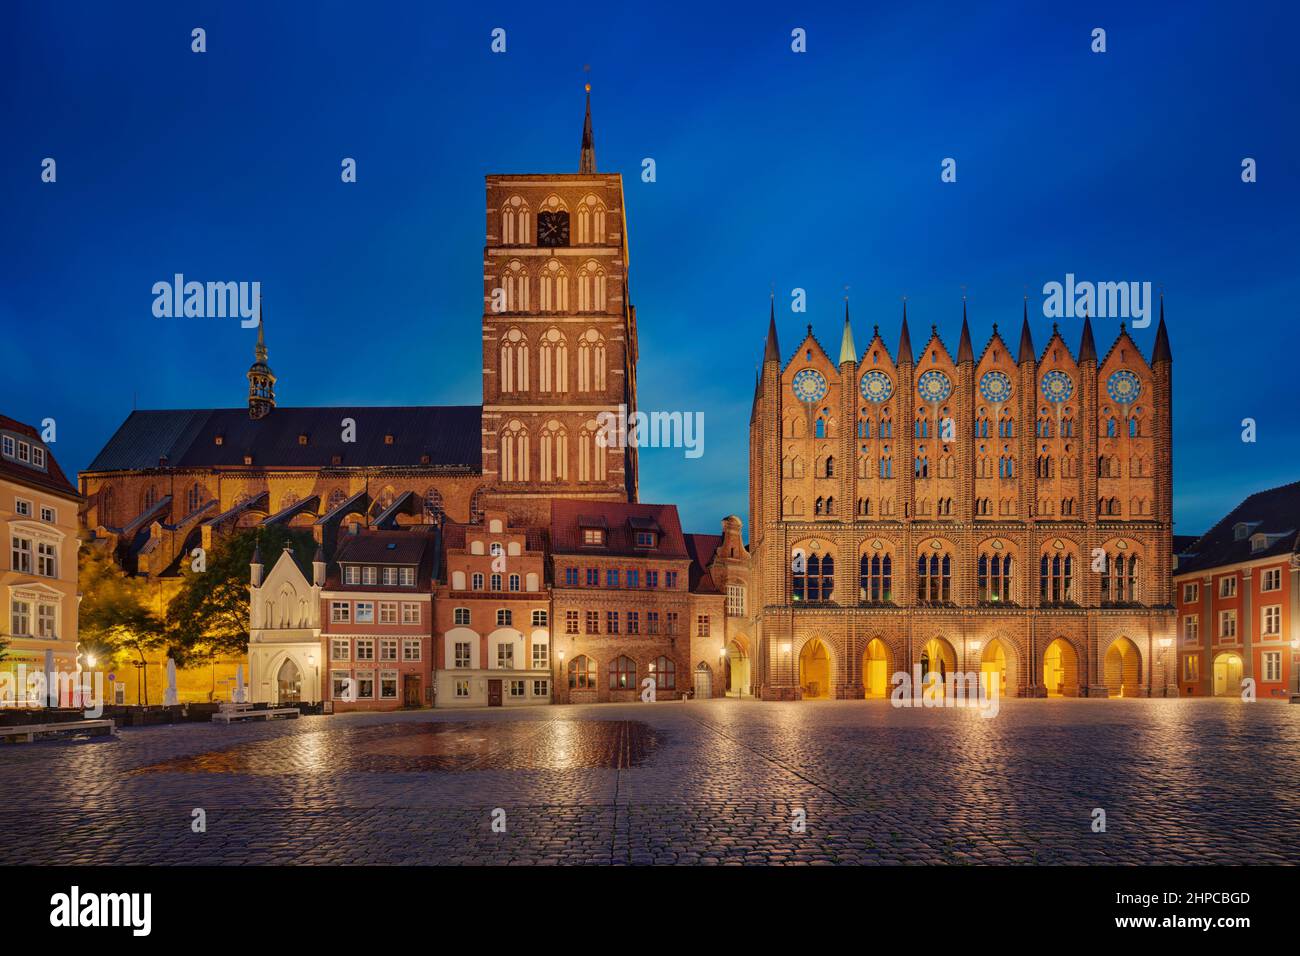 Stralsund Alter Markt Square with the city hall and the St. Nicholas Church Stock Photo